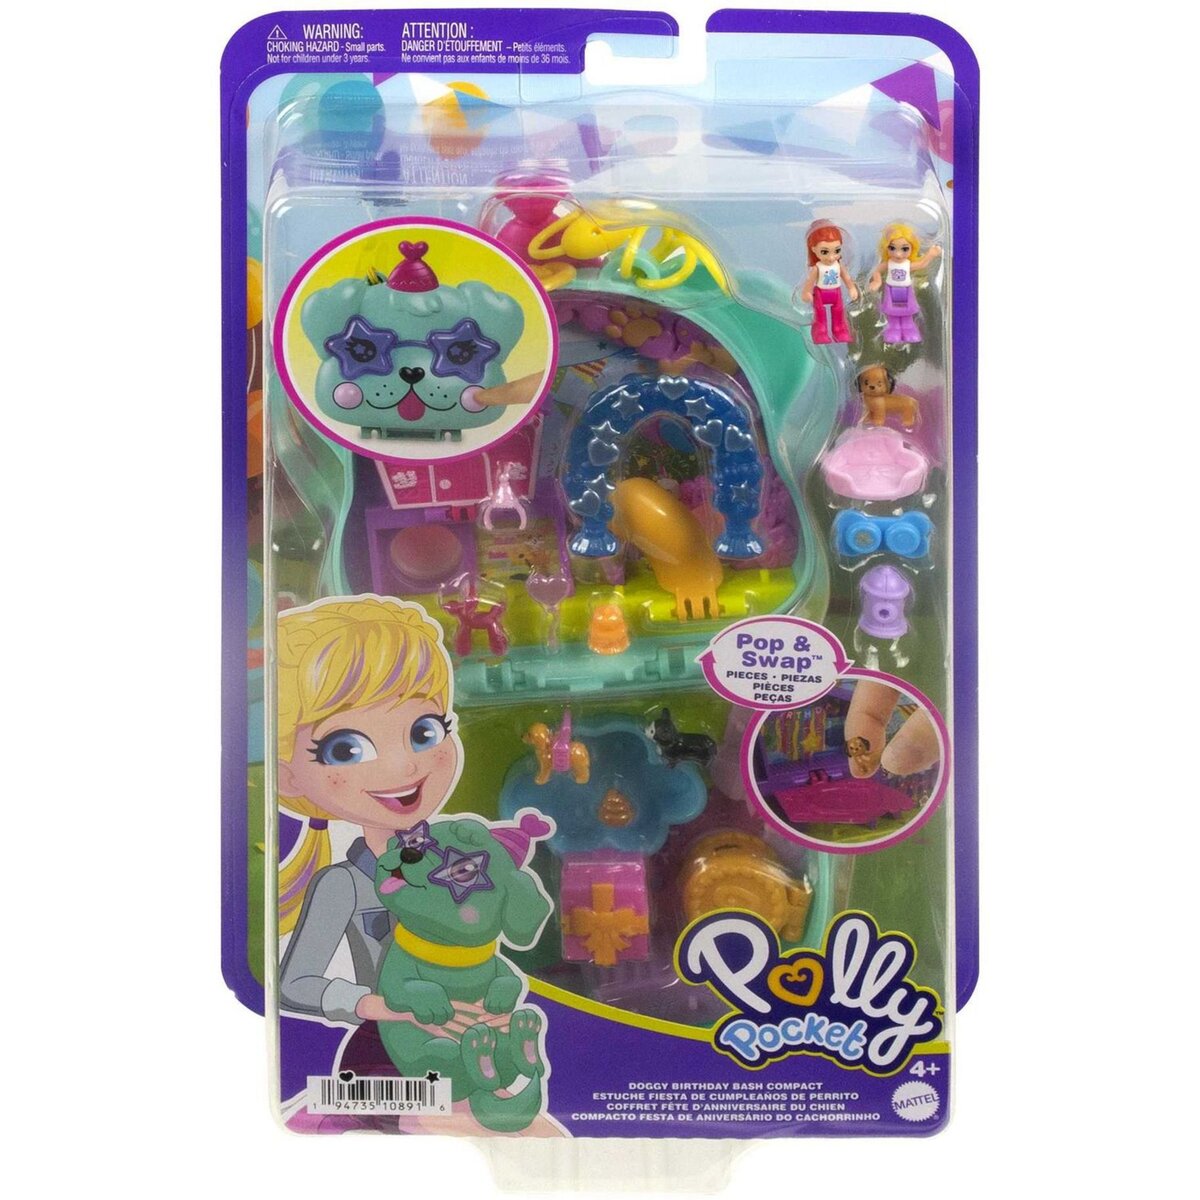 POLLY POCKET Coffret Anniversaire chiot Polly Pocket 